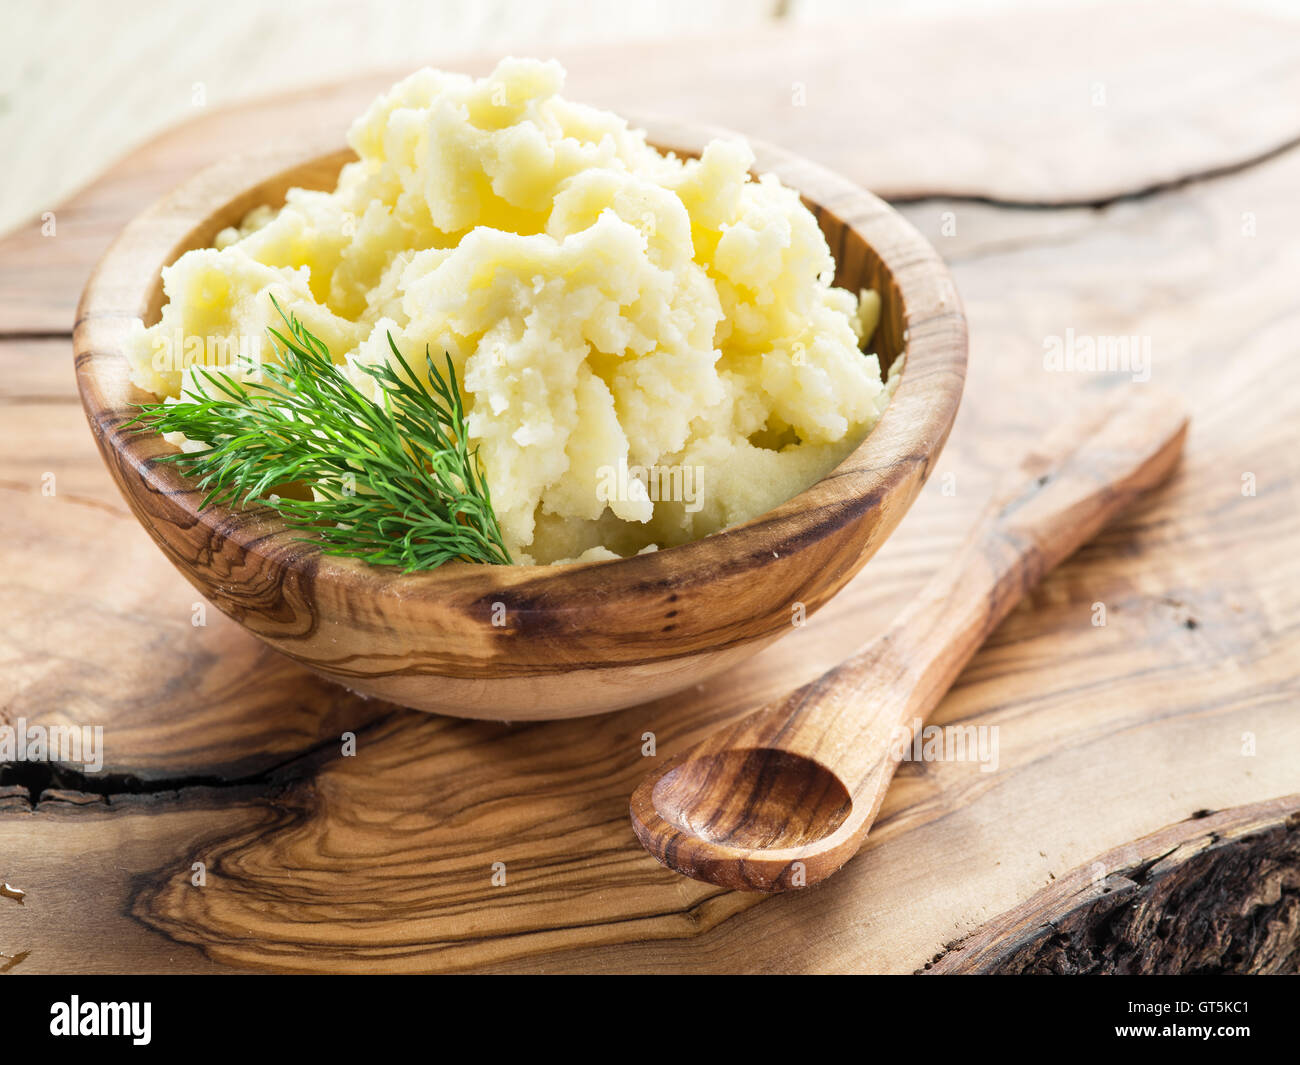 Mashed potatoes in the wooden bowl on the service tray. Stock Photo